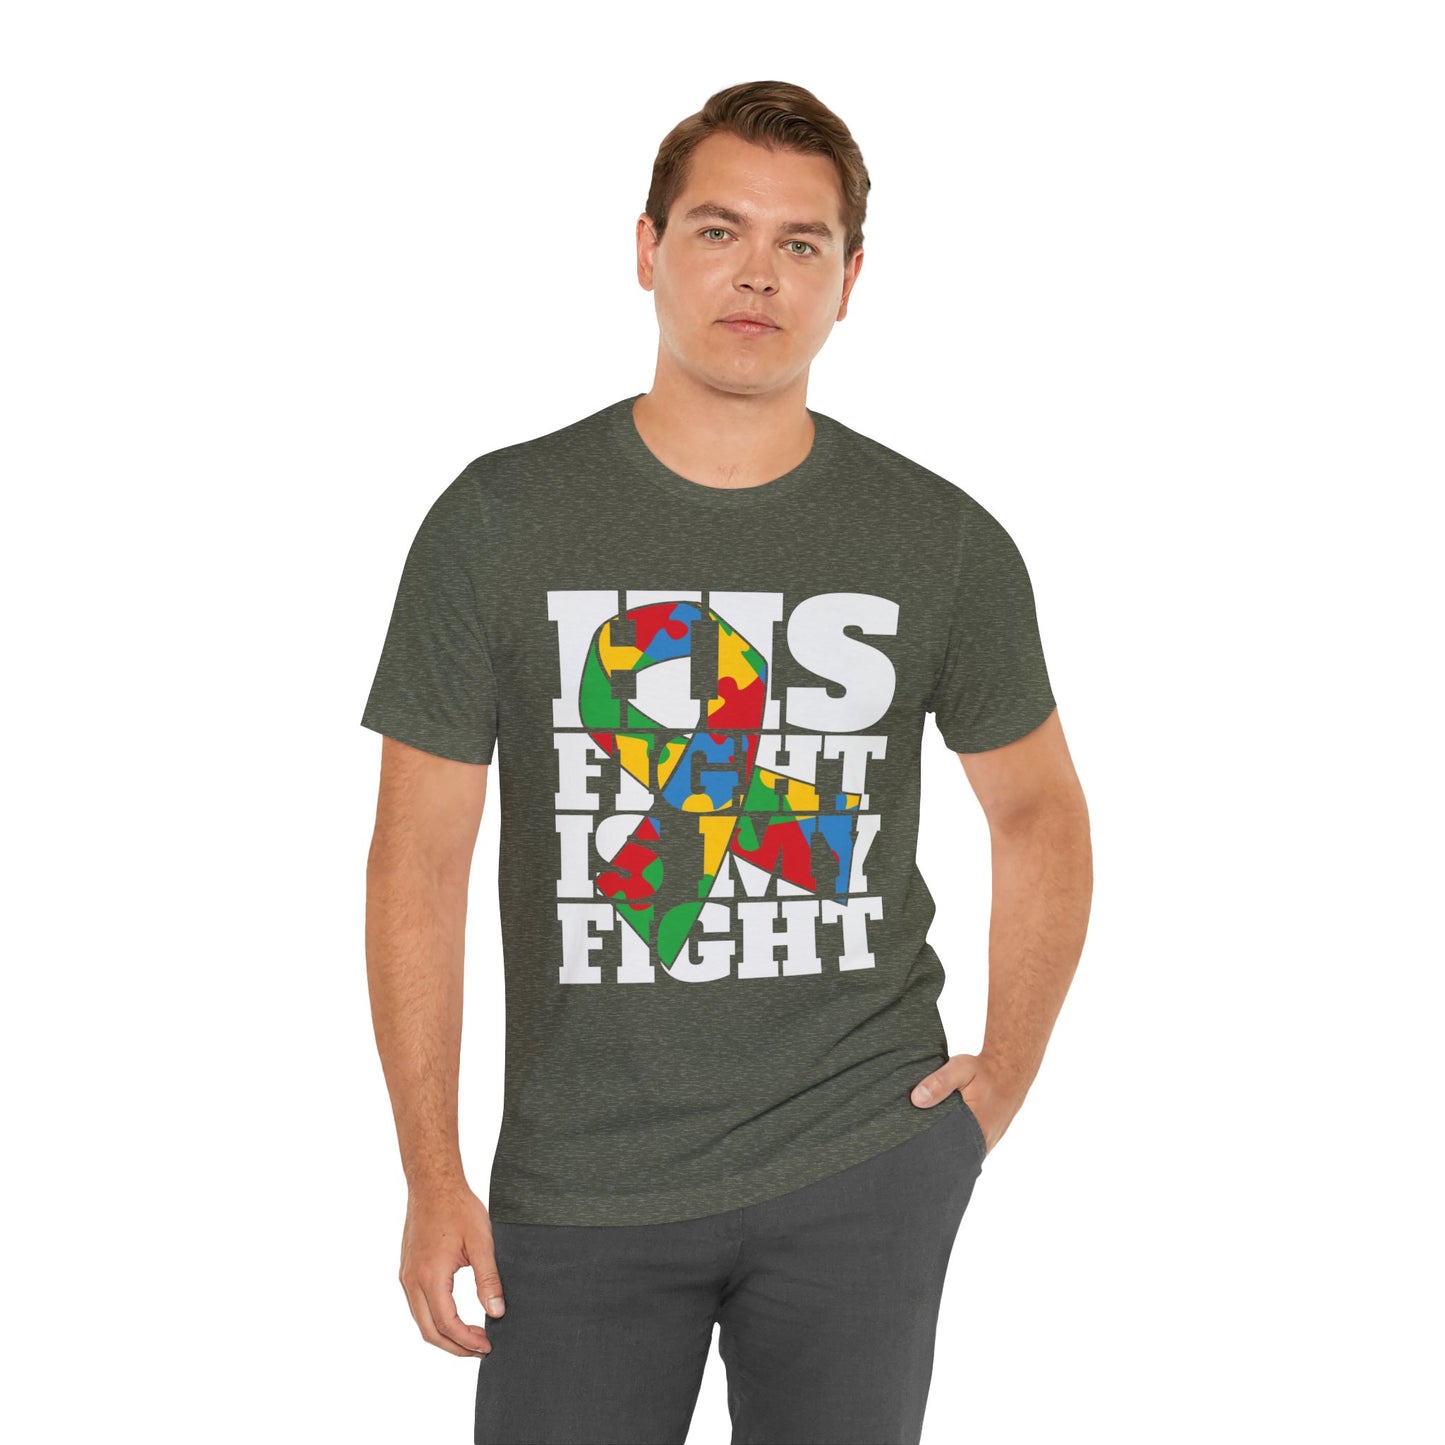 Autism Dad His Fight is My Fight - Autism Awareness Advocate Short Sleeve Tee